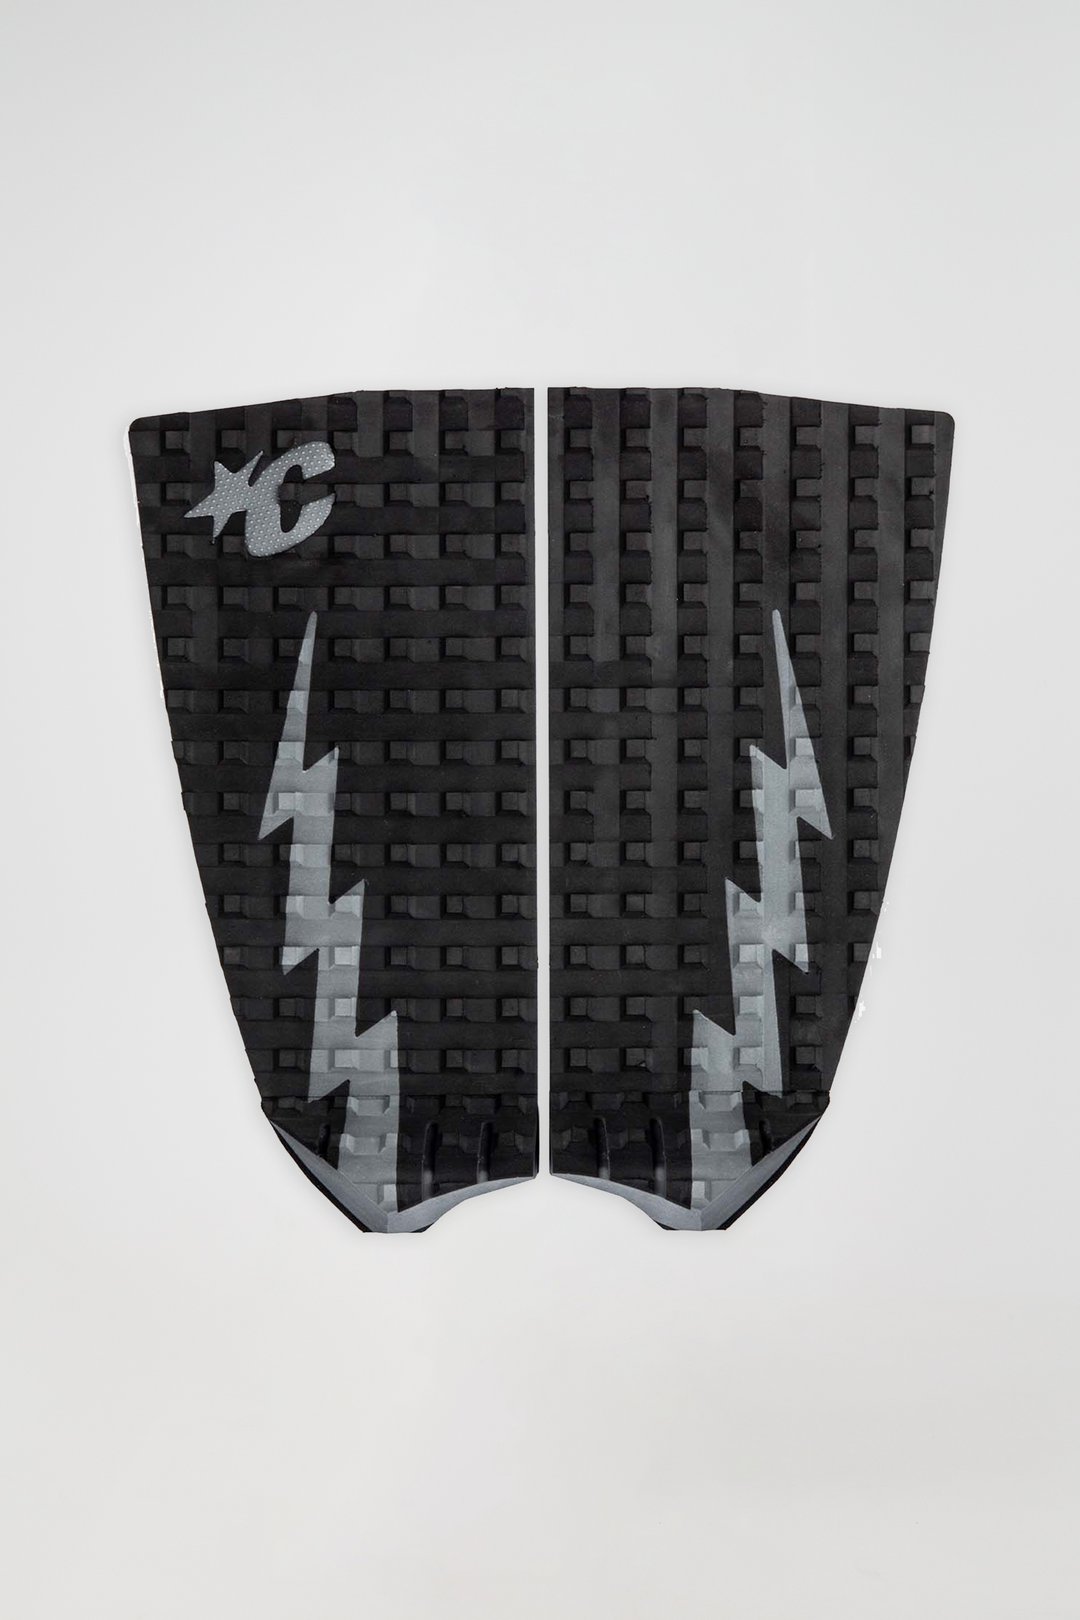 Creatures of Leisure Mick Fanning Performance Twin Pad